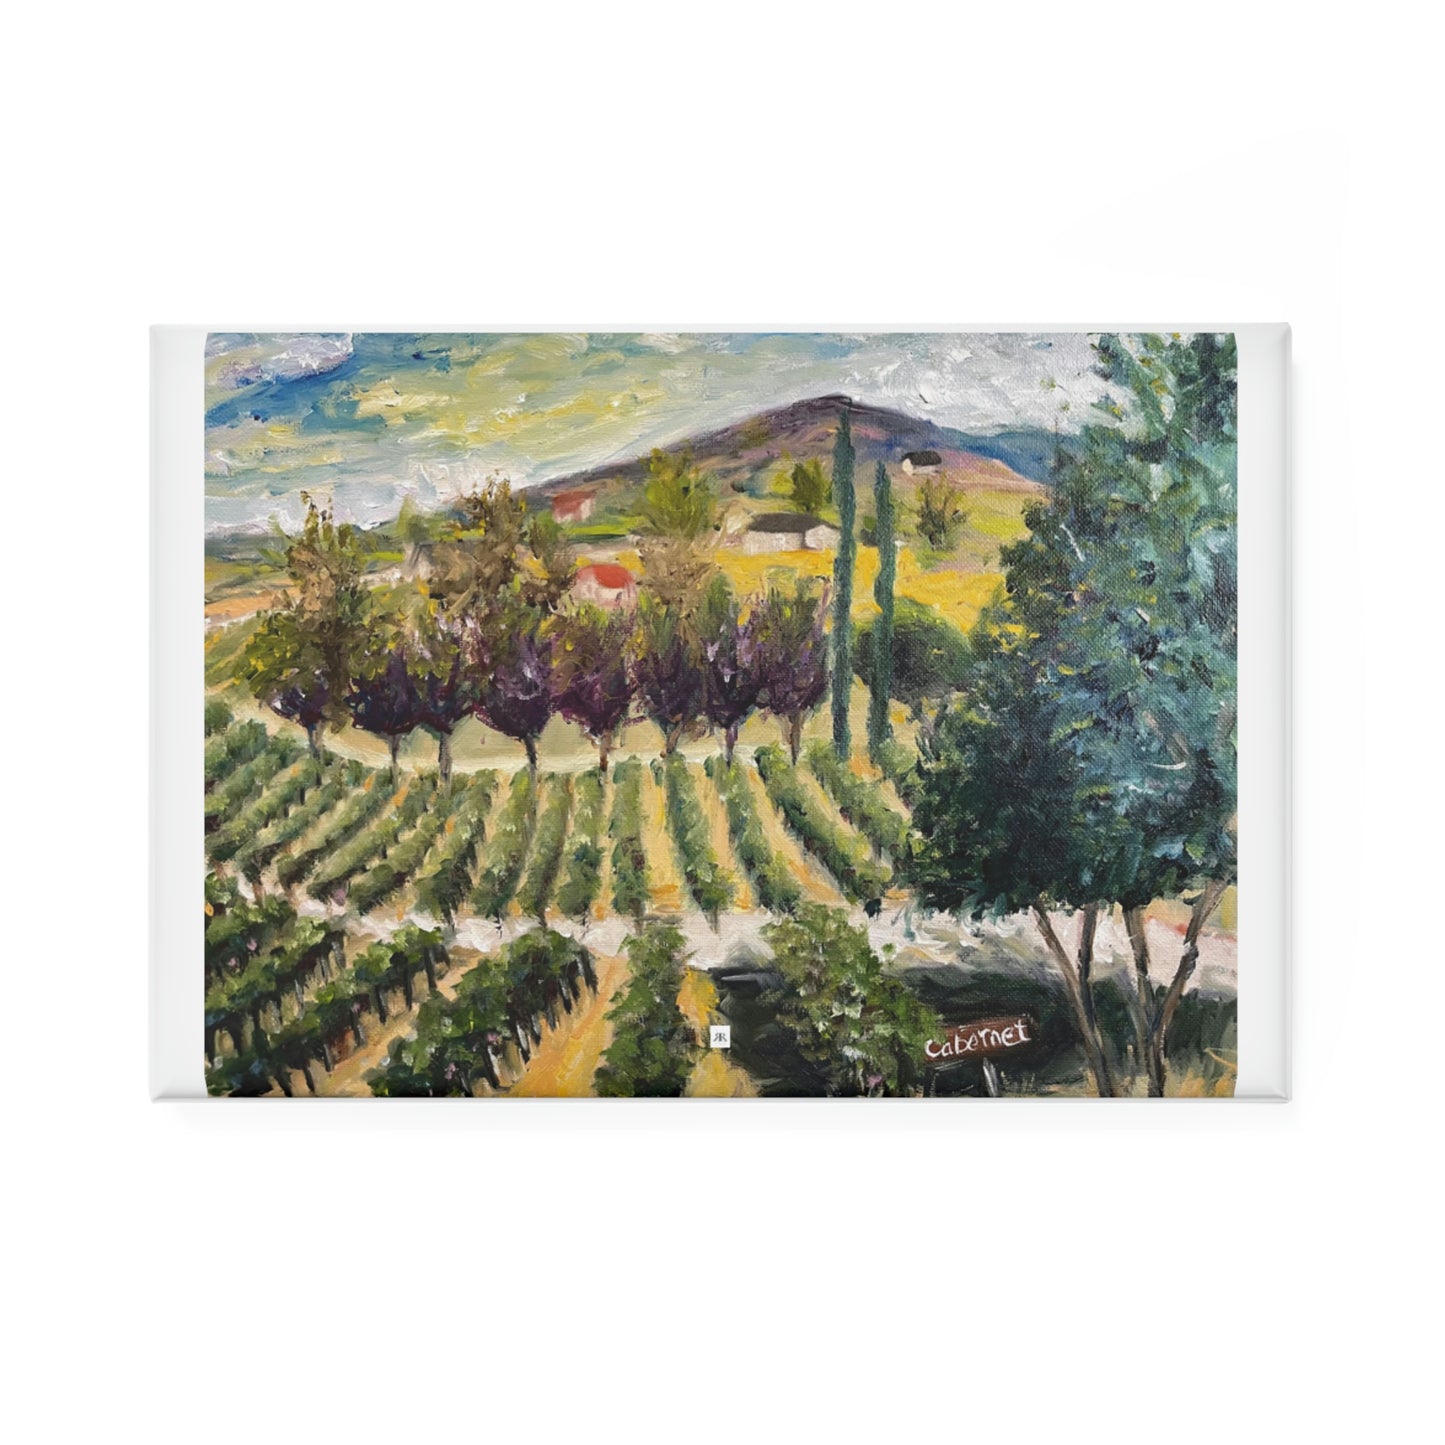 Cabernet Lot at Oak Mountain Winery Button Magnet, Rectangle